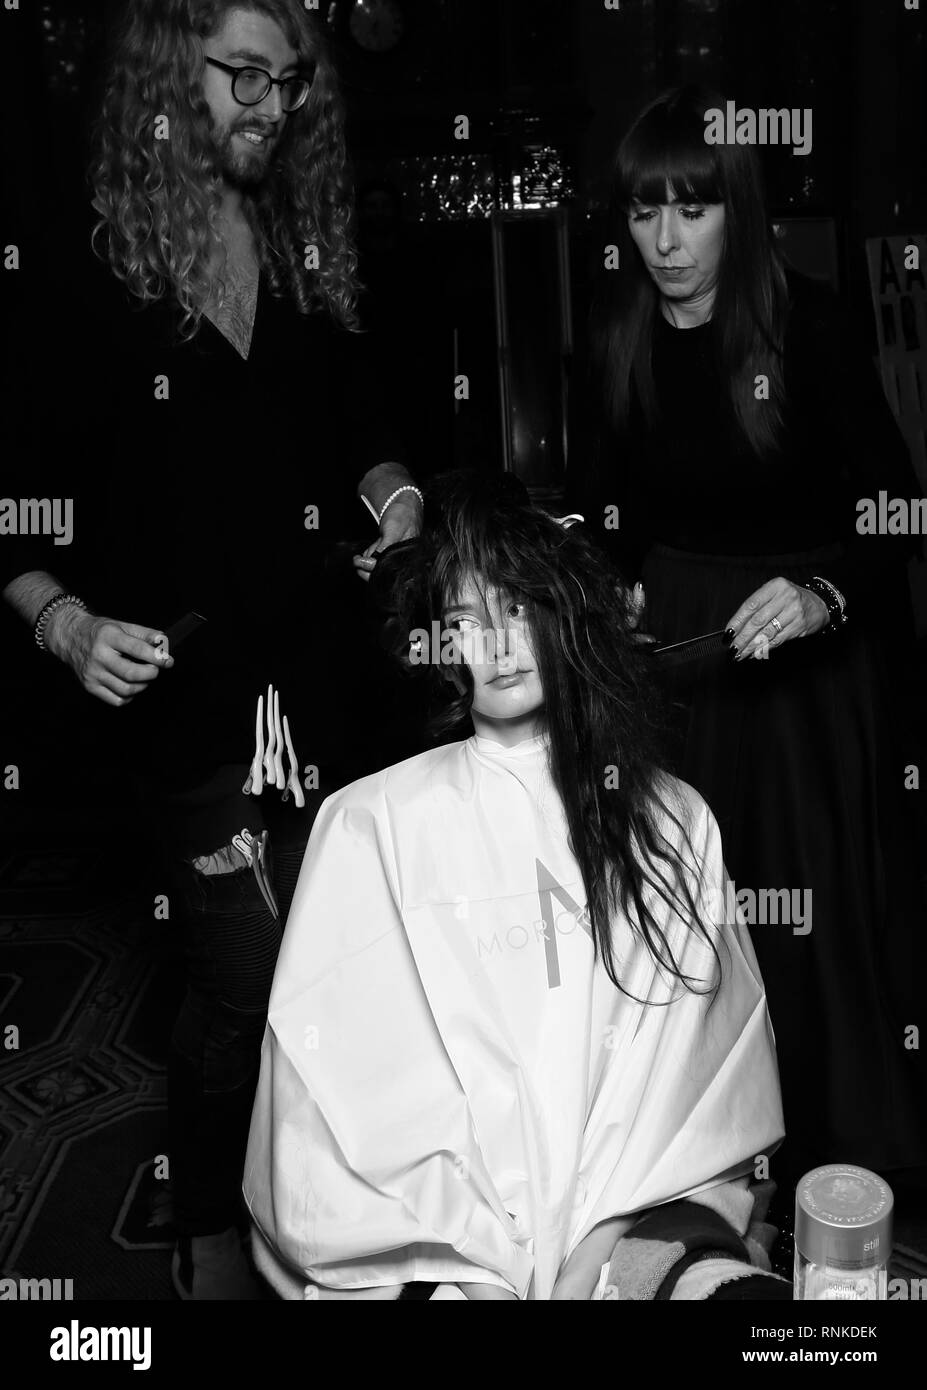 LONDON, ENGLAND - FEBRUARY 17: A model in hair and make up backstage ahead of the Kristian Aadnevik show during London Fashion Week Autumn/Winter 2019 Stock Photo